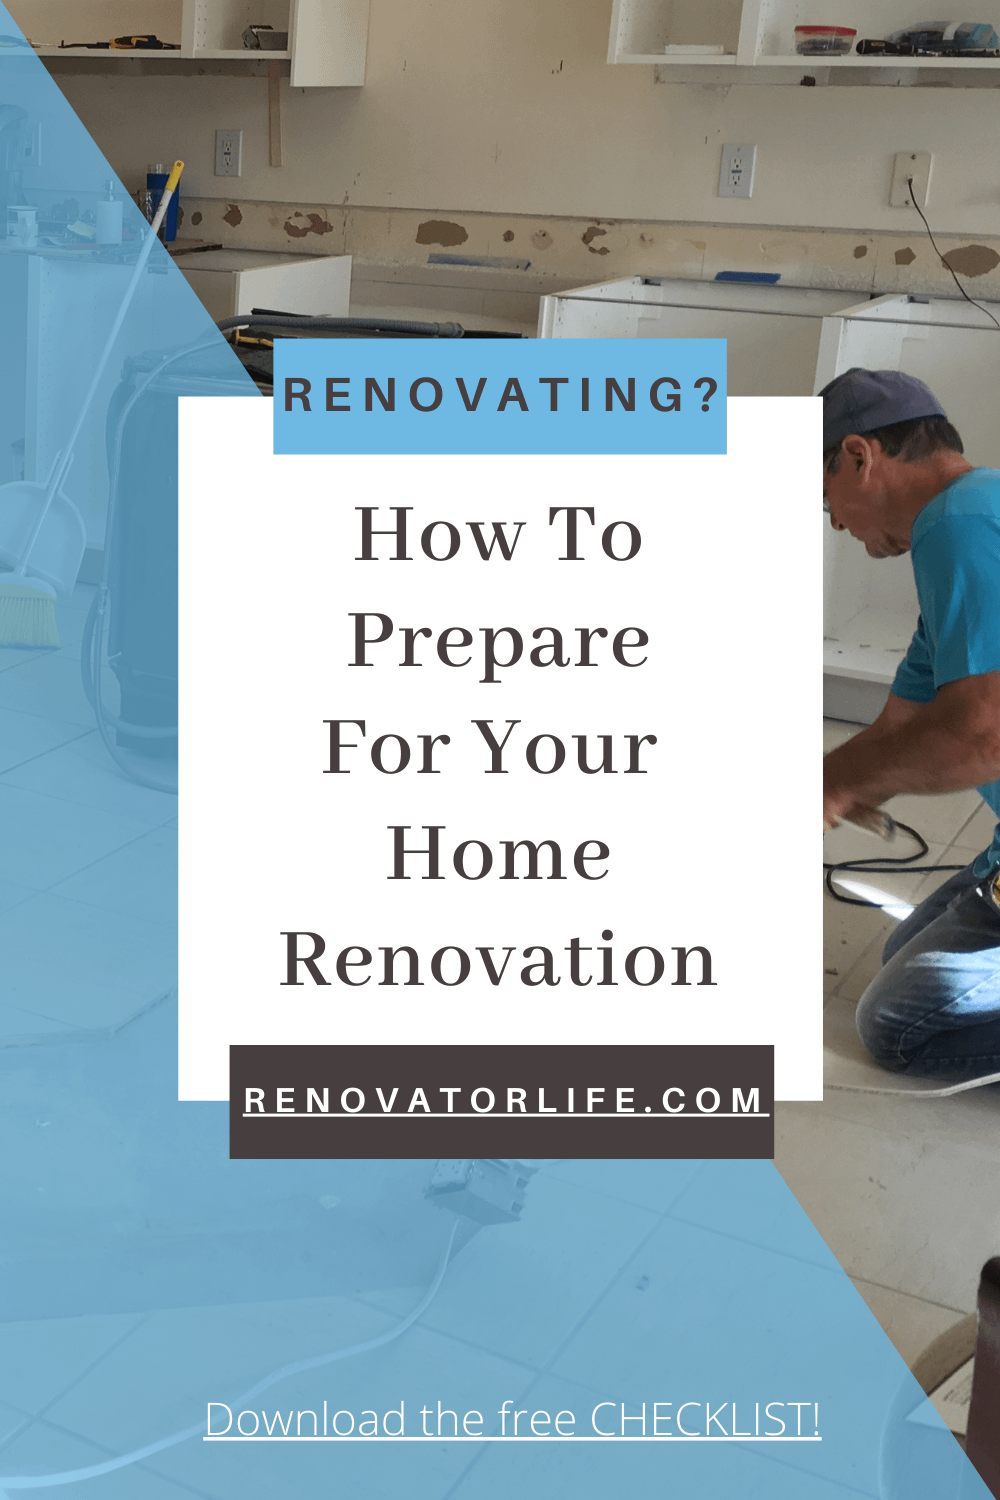 How to prepare for your home renovation